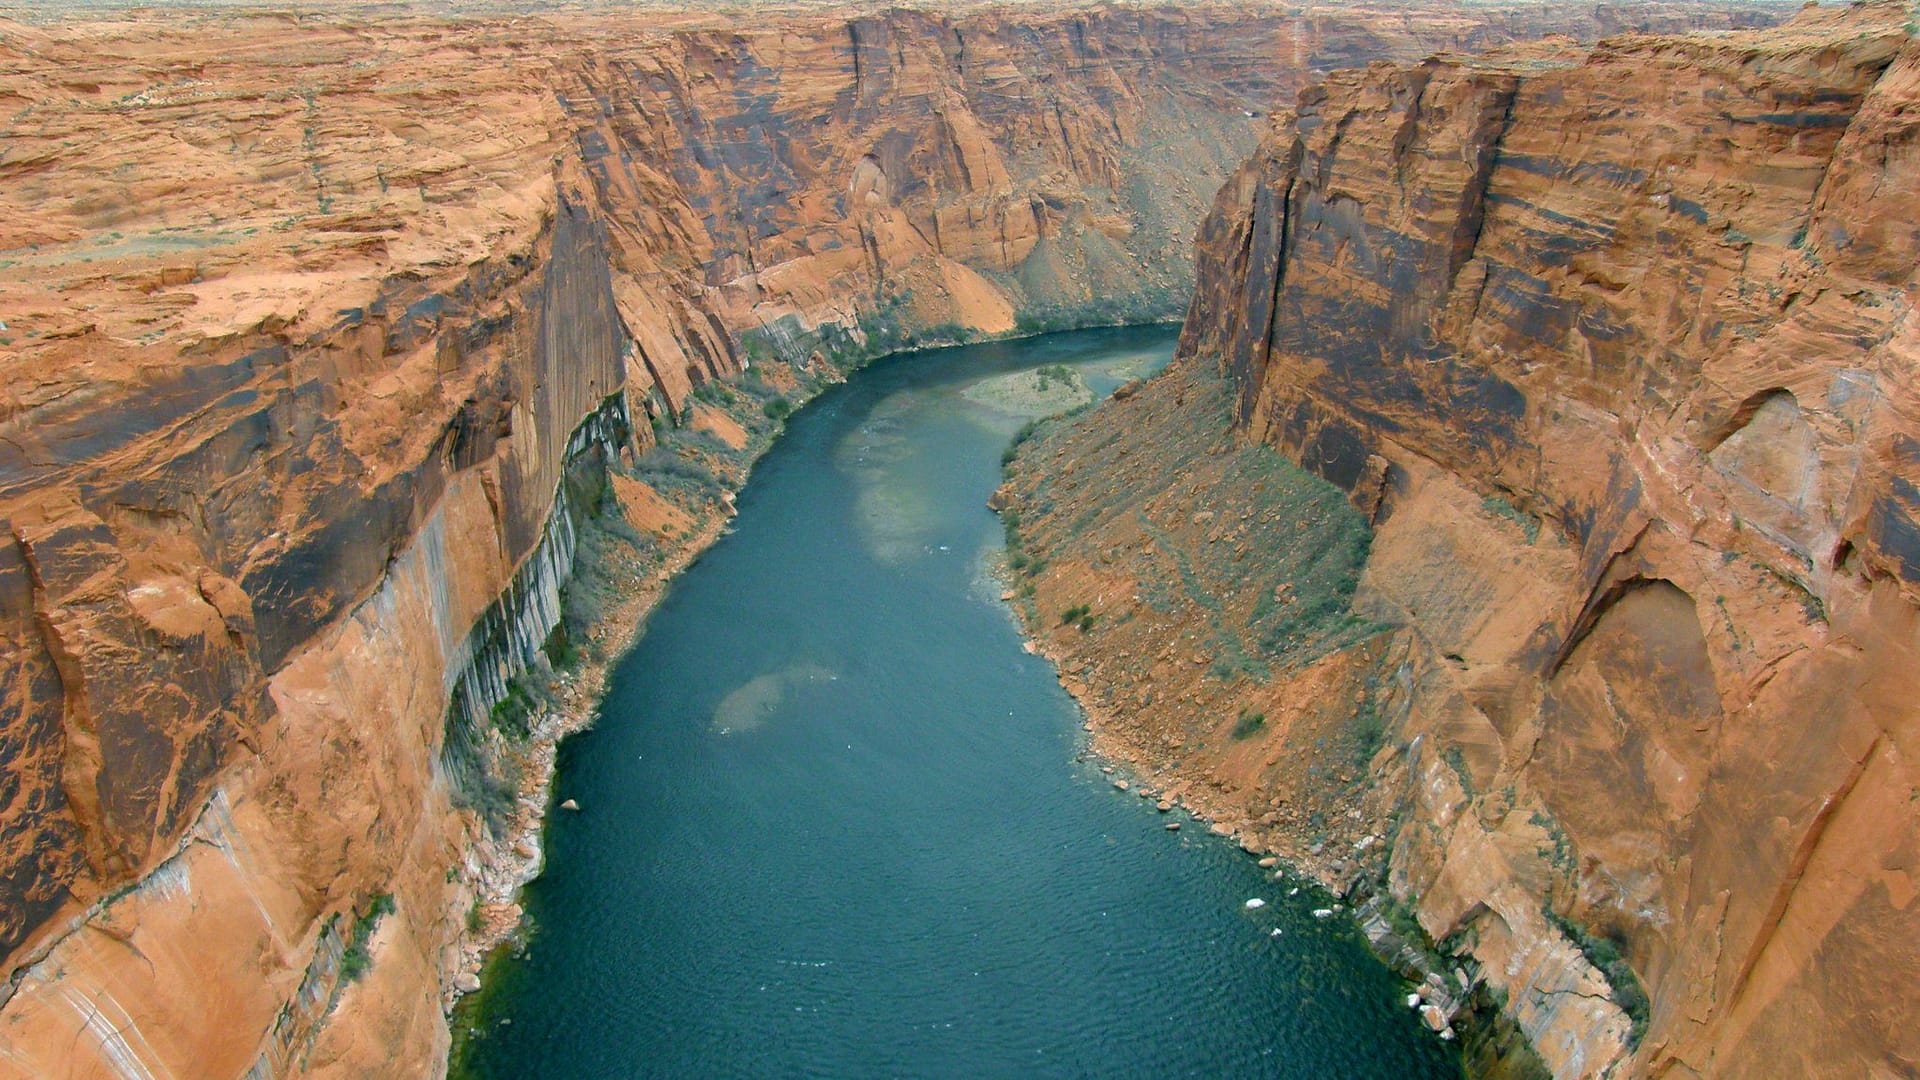 Image: Colorado River where father and son traveled together